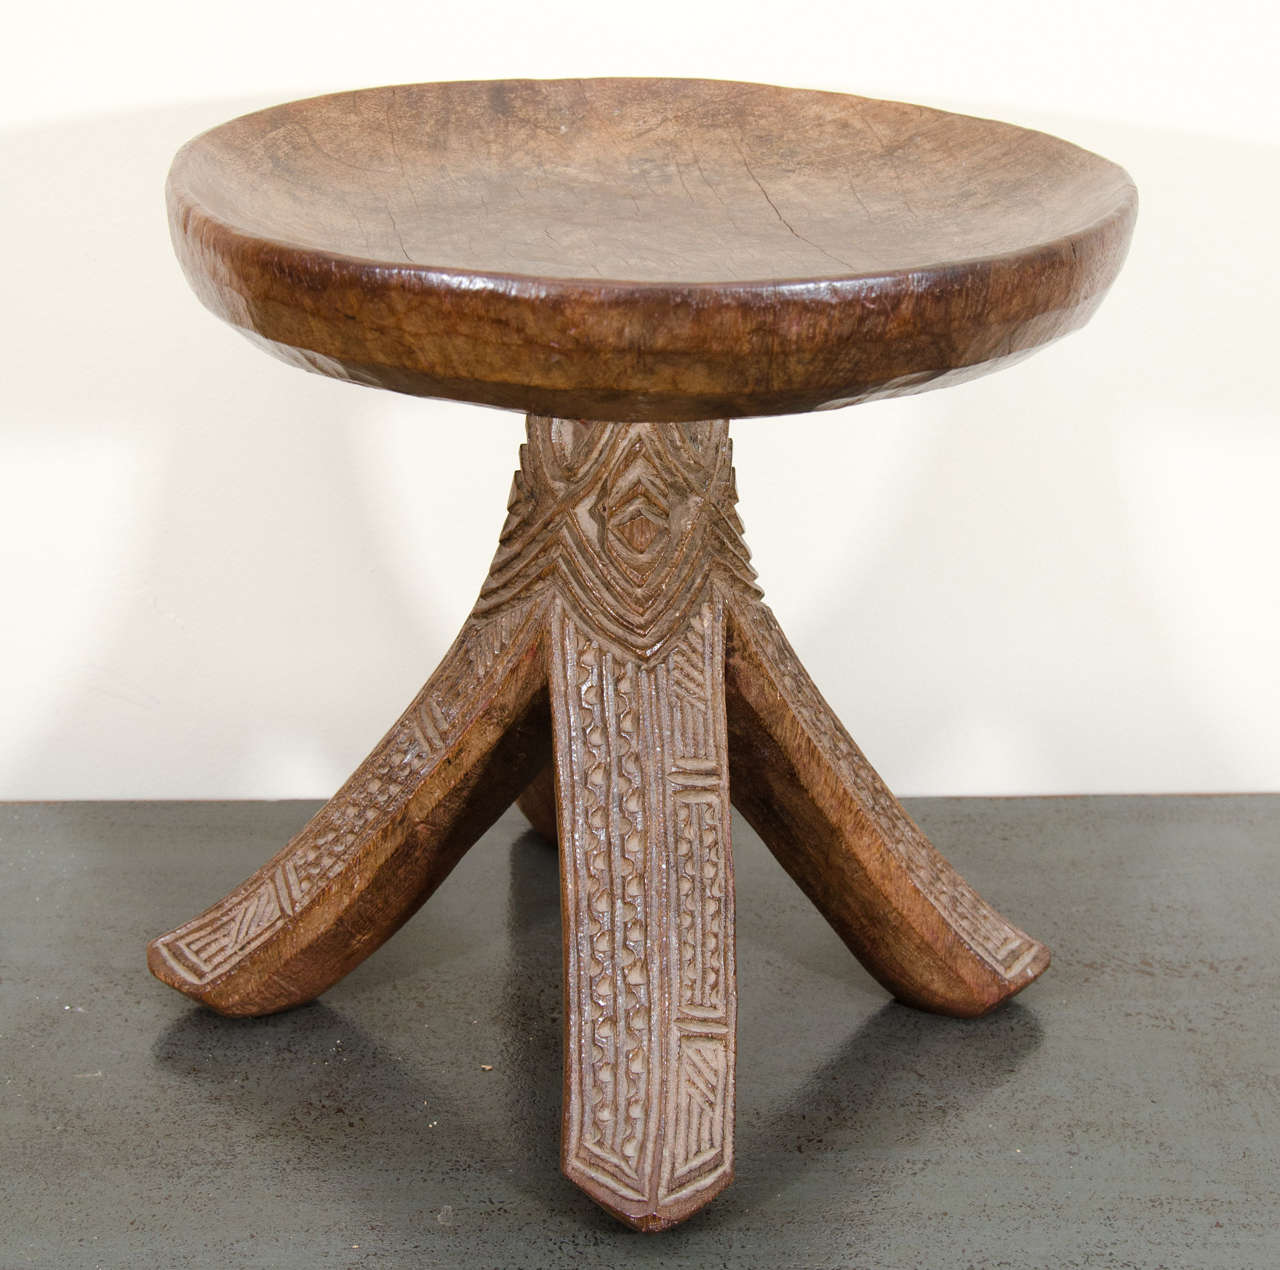 A magnificent Igbo wooden stool from Nigeria.

The Igbo homeland occupies a broad area of present day central Nigeria, north of the Niger River Delta. The Igbo People trace their origins to the region’s earliest hunters and gathers, who settled